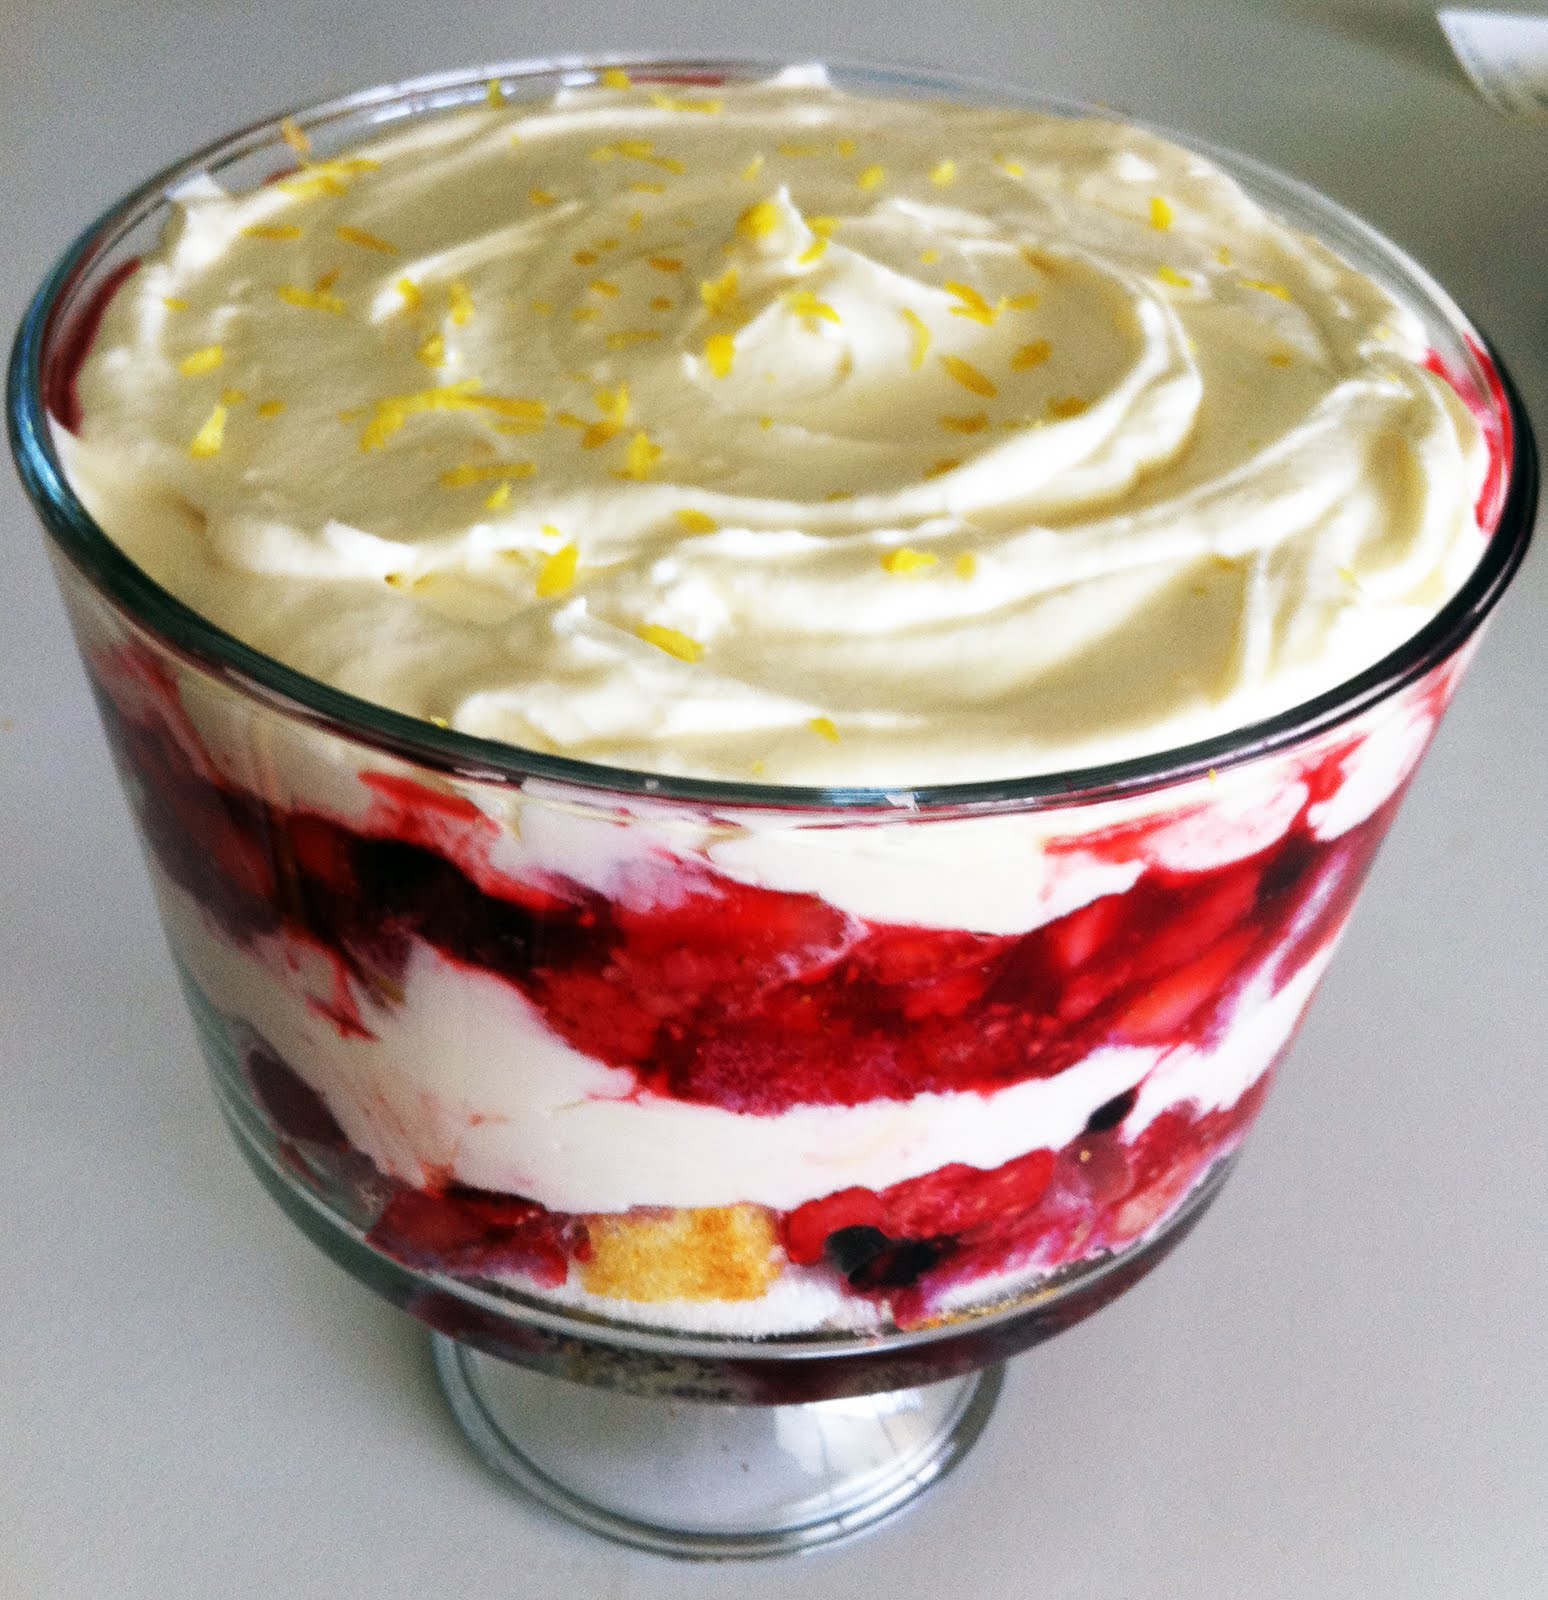 a day in the kitchen of...: three-berry trifle with lemony whipped cream